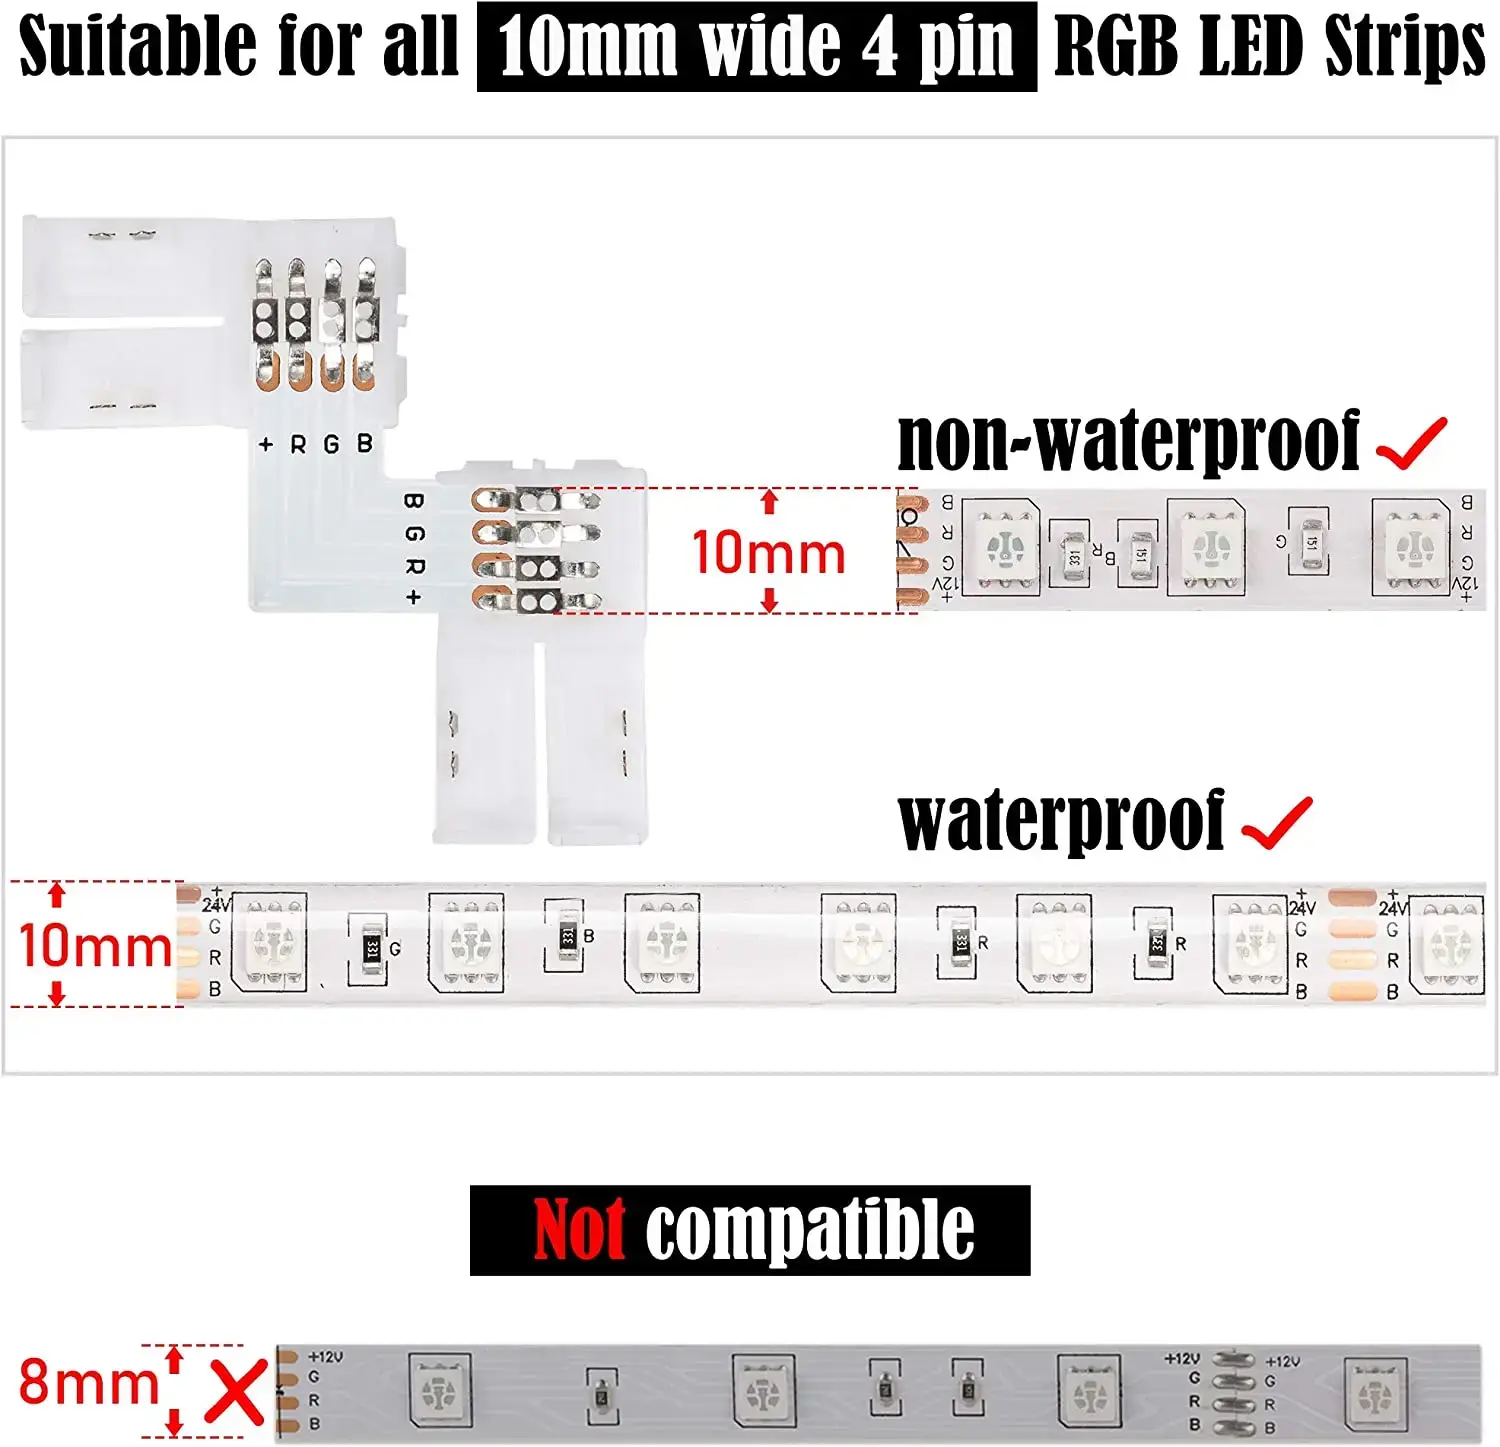 L Shape 4-Pin LED Connectors 10mm Wide Right Angle Corner Connectors Solderless Adapter Connector Terminal for 3528/5050 SMD RGB